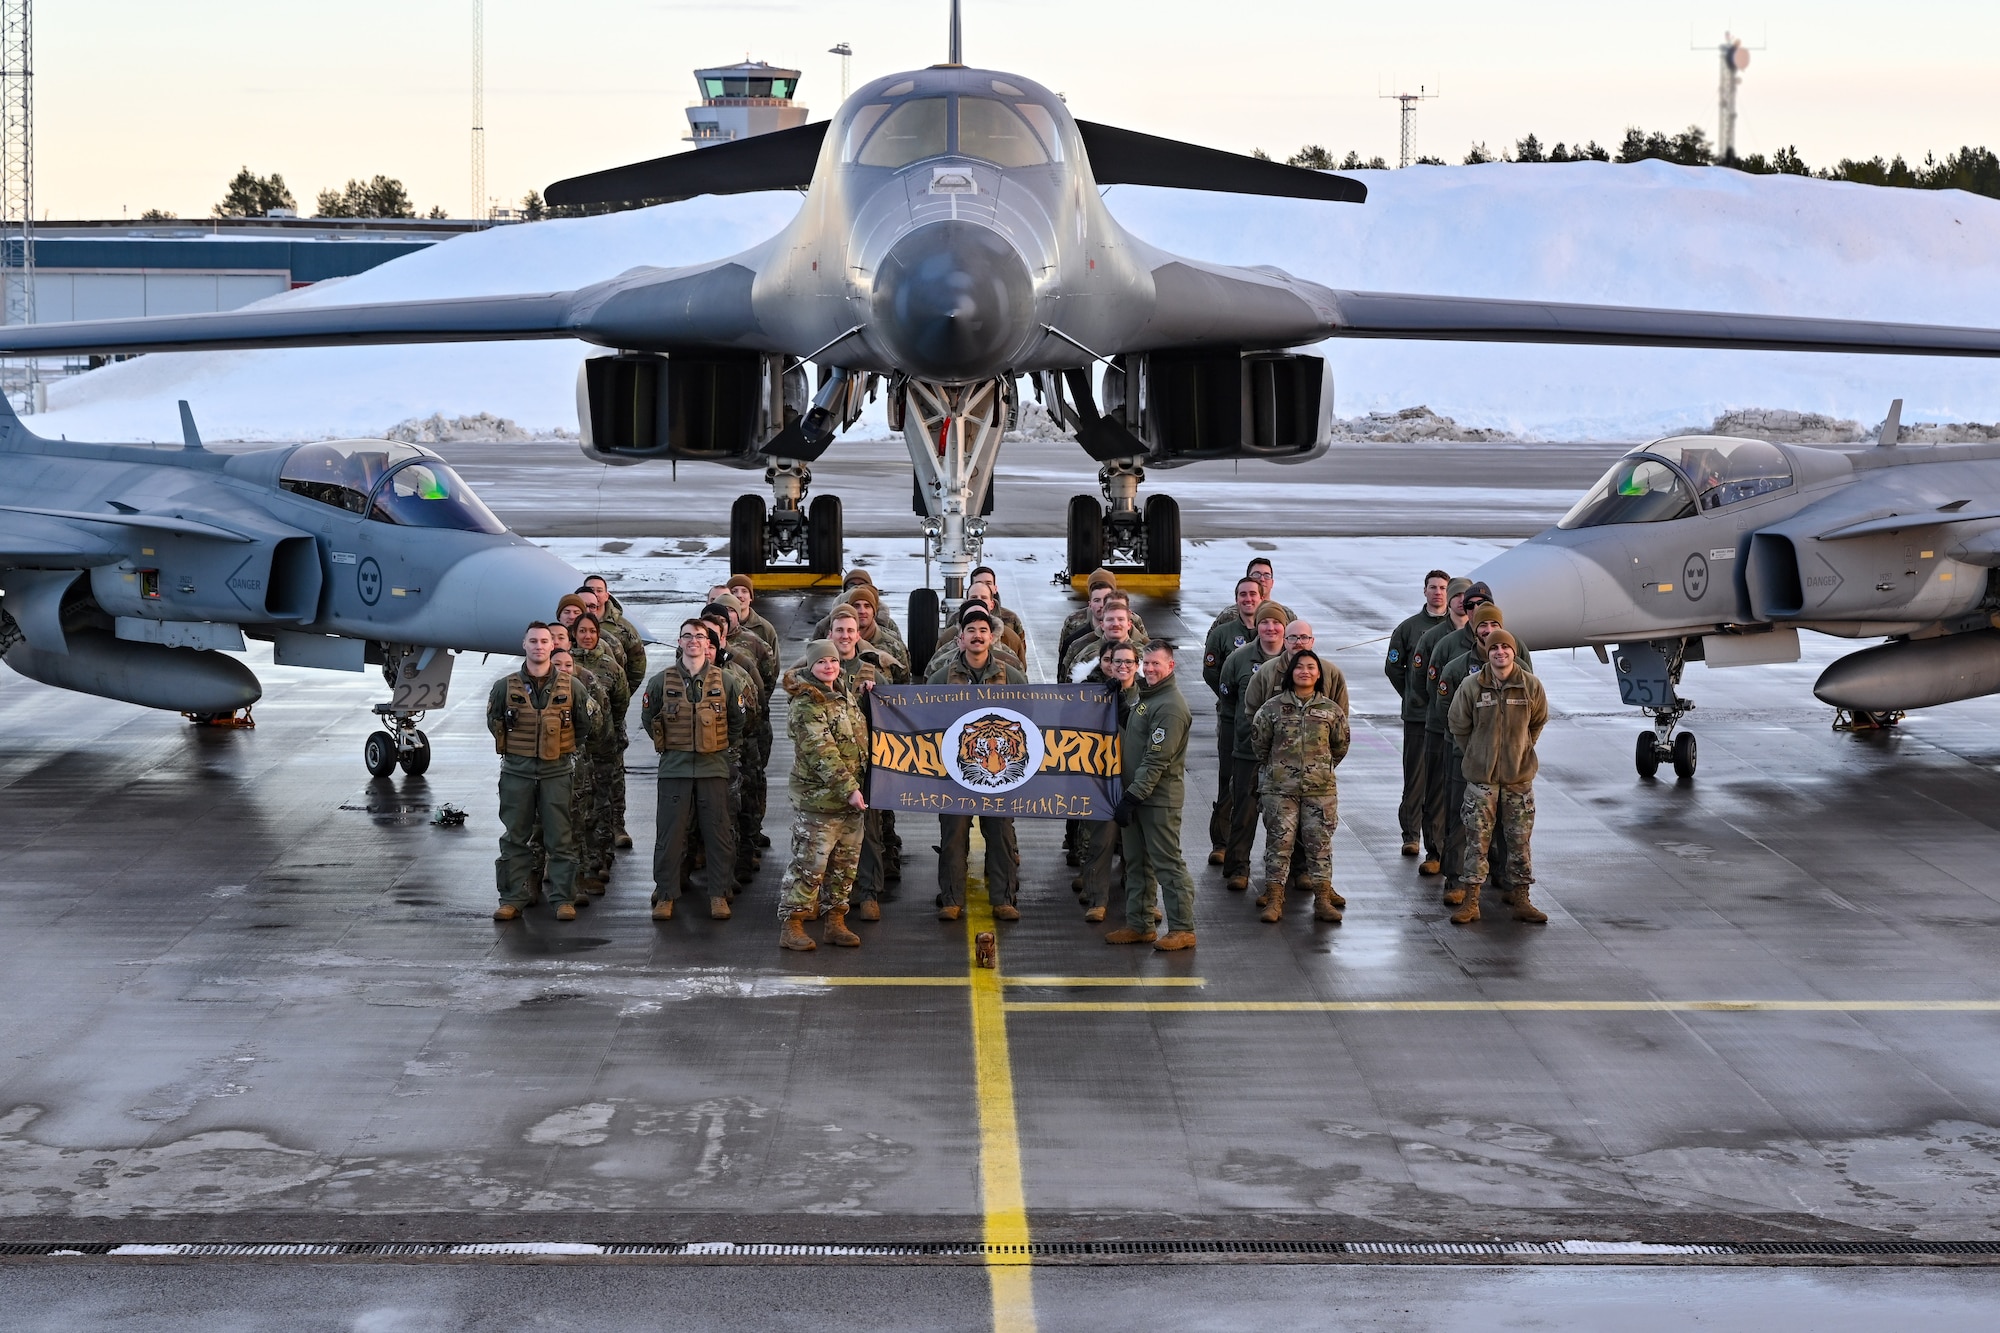 U.S. Air Force Airmen assigned to the 37th Bomb Squadron, Ellsworth Air Force Base, South Dakota, pose for a group photo in front of a B-1B Lancer and two Saab JAS 39 Gripens at Luleå-Kallax Air Base, Sweden, Feb. 26, 2024, during Bomber Task Force 24-2. These BTF missions are representative of the U.S.' extended deterrent commitment to its Allies and partners and enhance regional security. BTF operations provide U.S. leaders with strategic options to assure Allies and partners, while deterring potential adversary aggression across the globe. (U.S. Air Force photo by Staff Sgt. Jake Jacobsen)